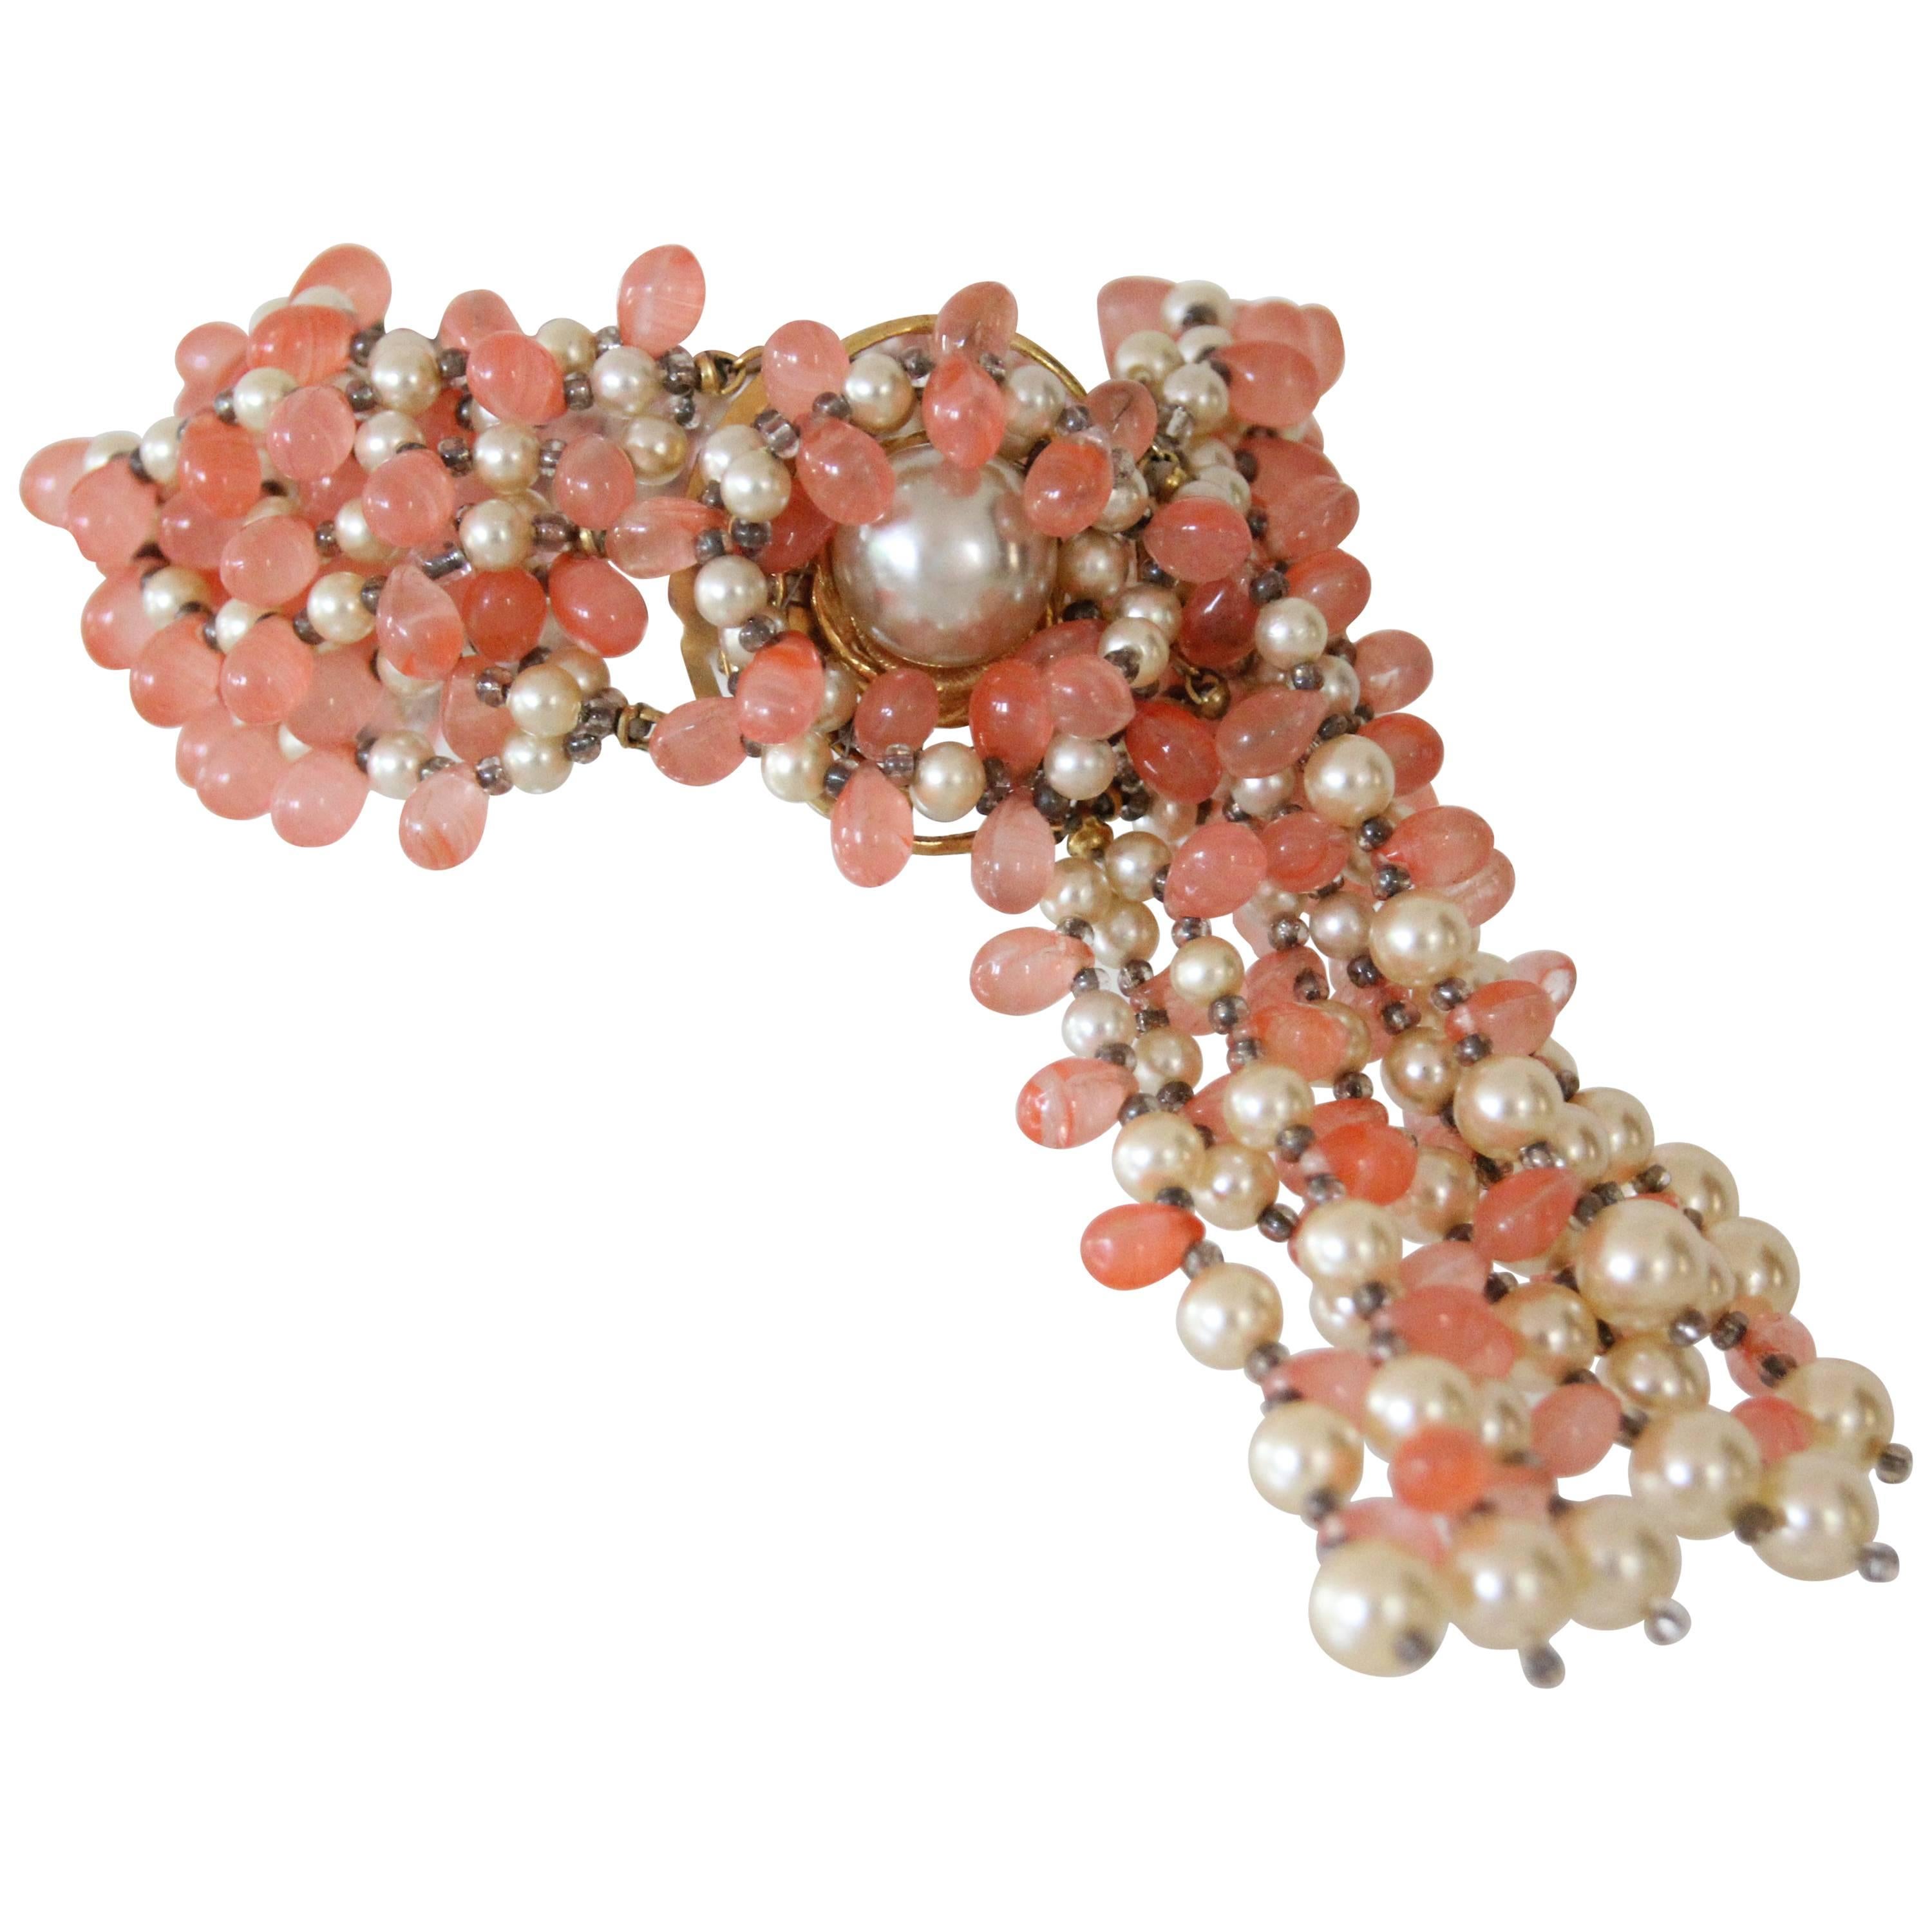 1960s Marvella "Salmon Roe" and Faux Pearl Beaded Bracelet w Fringe Clasp